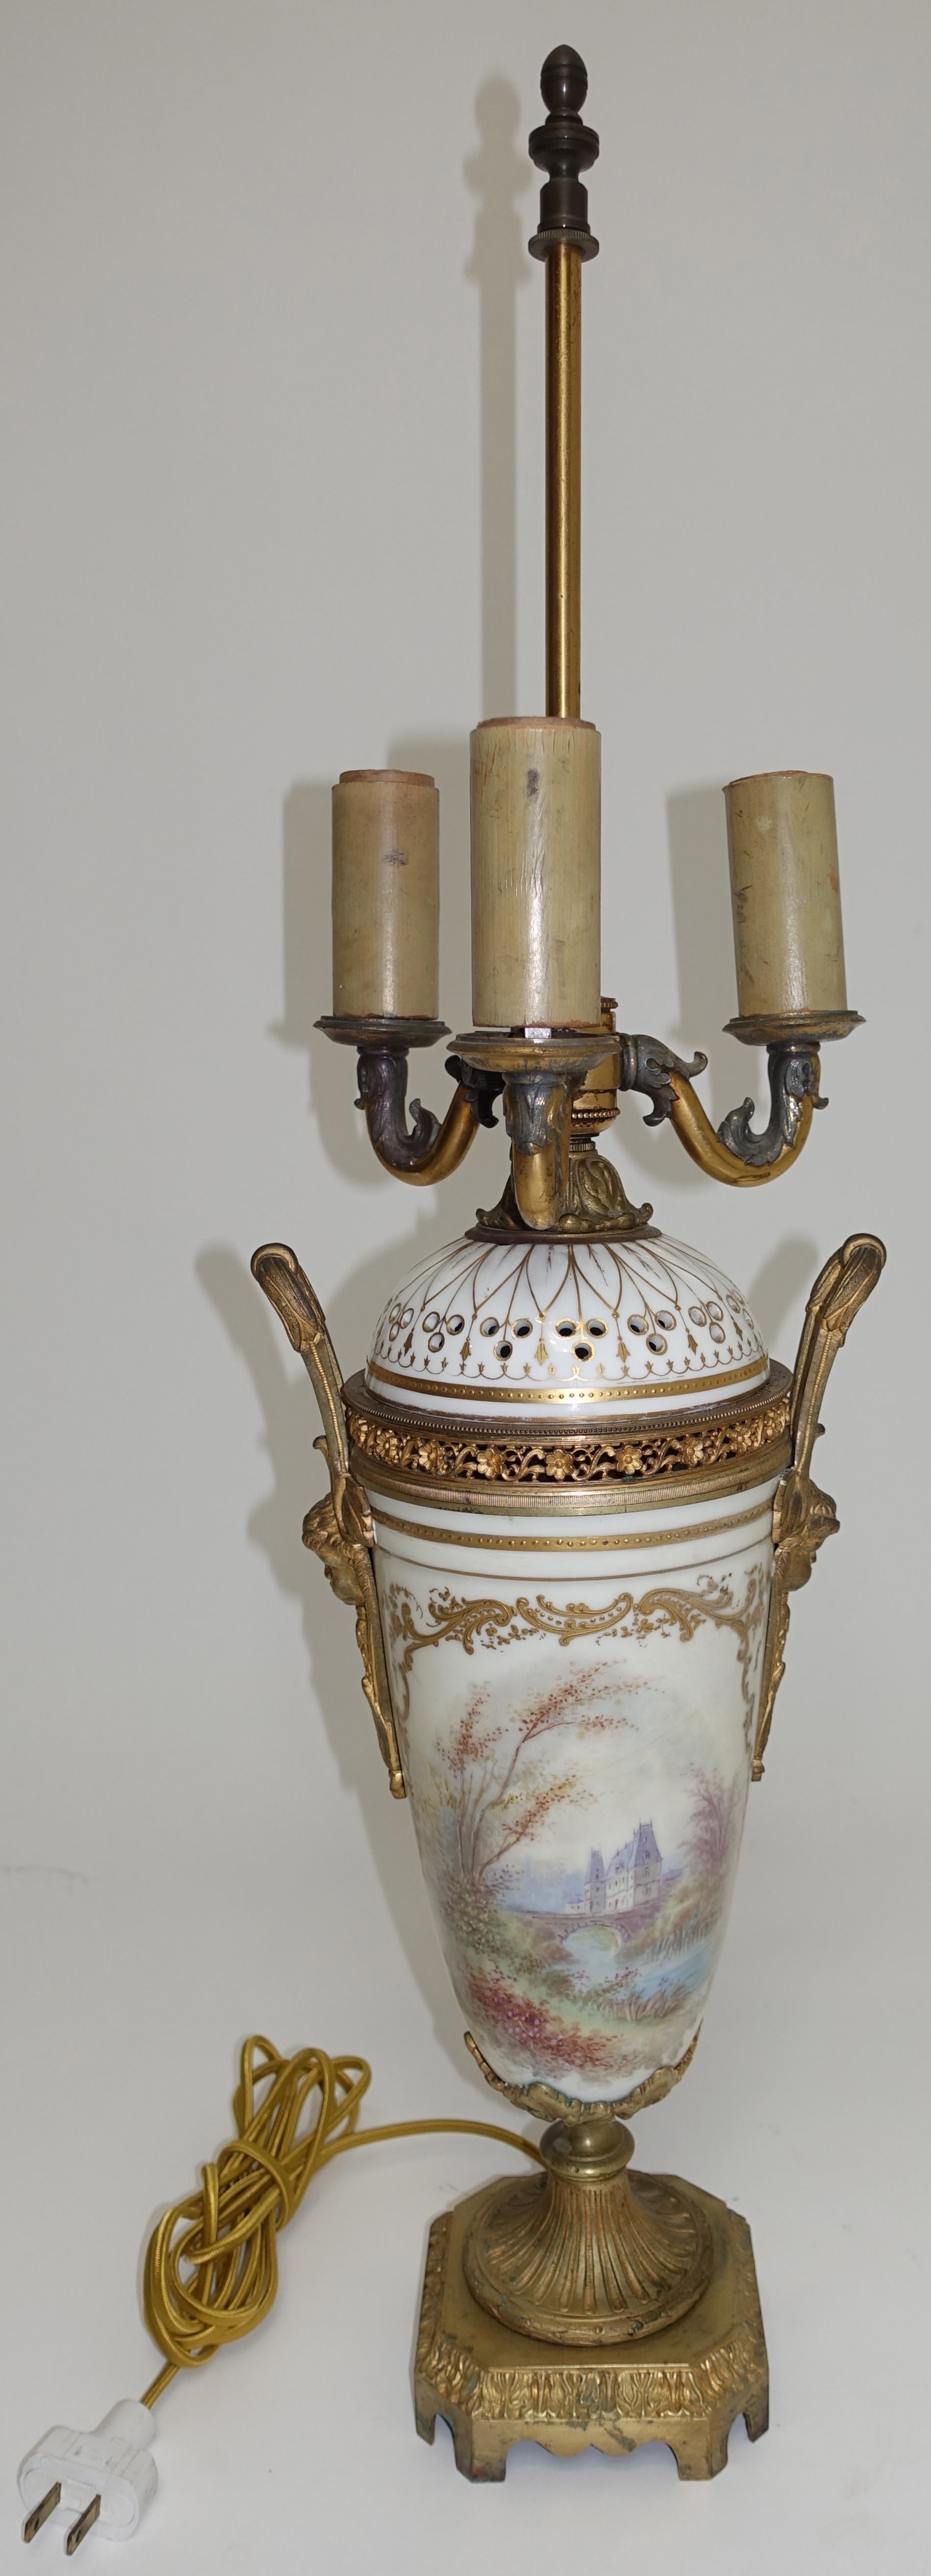 19th Century Sèvres Porcelain and Ormolu Covered Urn/Lamp 5